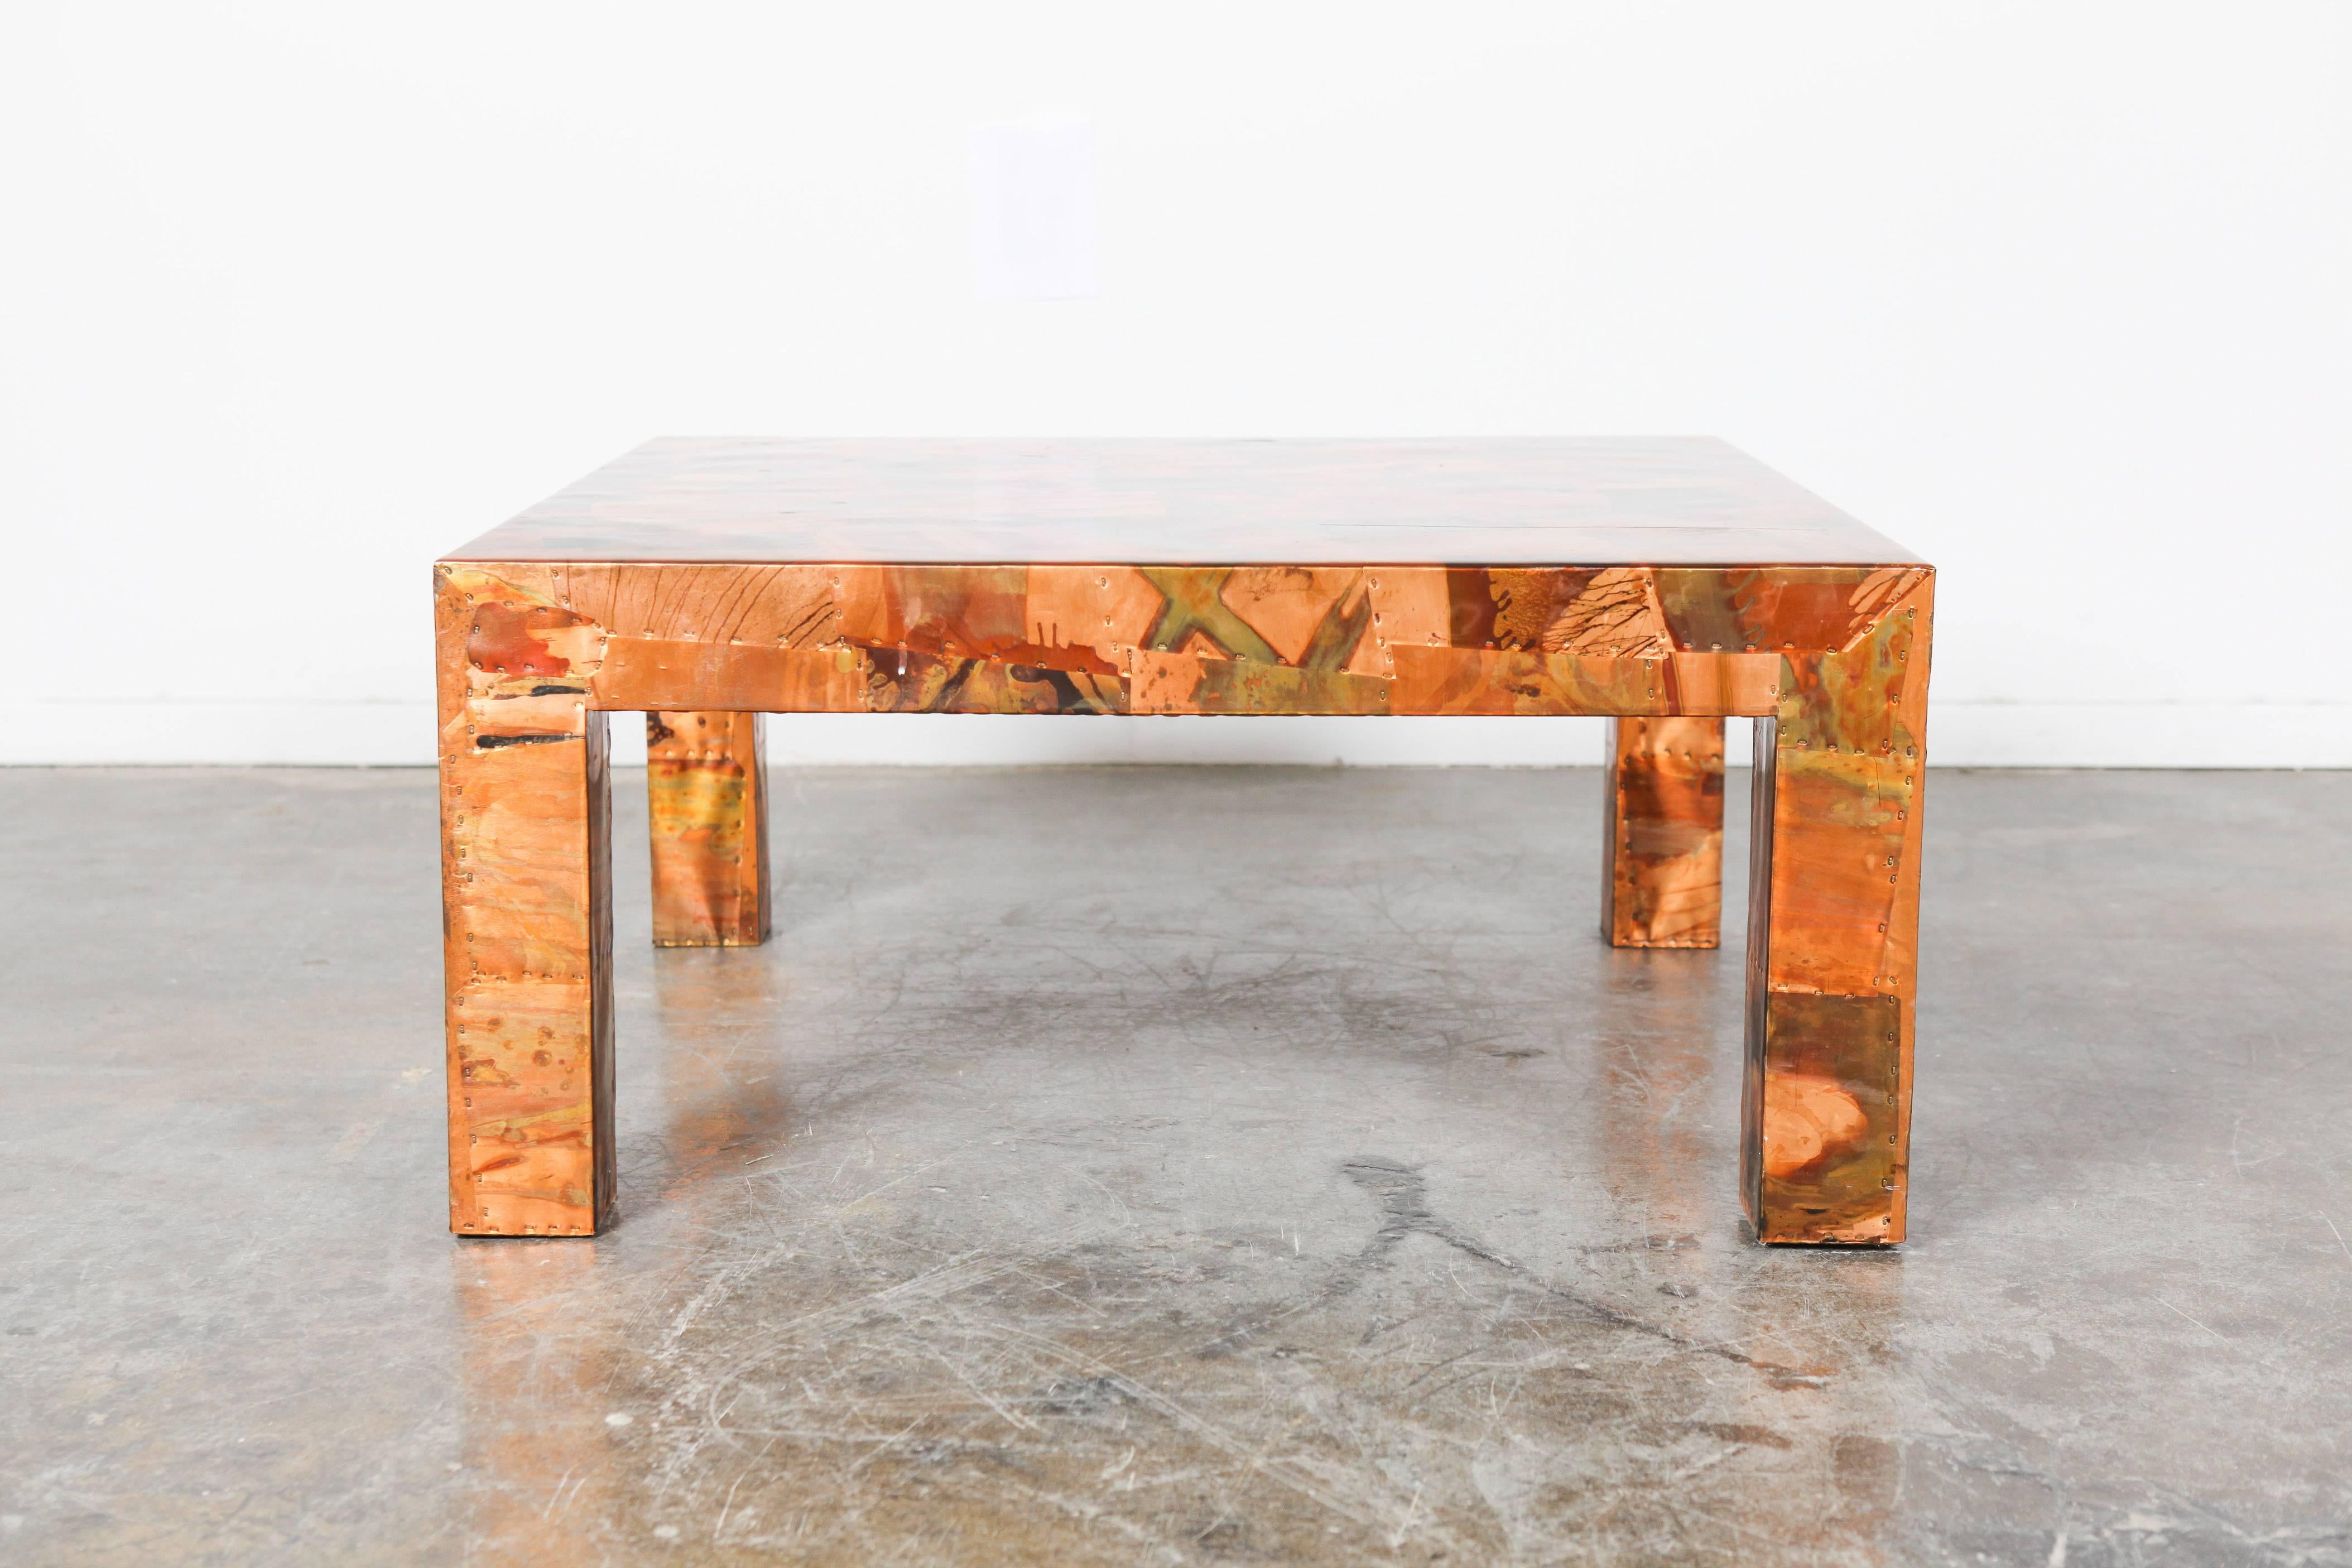 Brazilian Mid-Century Modern square hammered mixed metal coffee table with block legs designed by Percival Lafer.